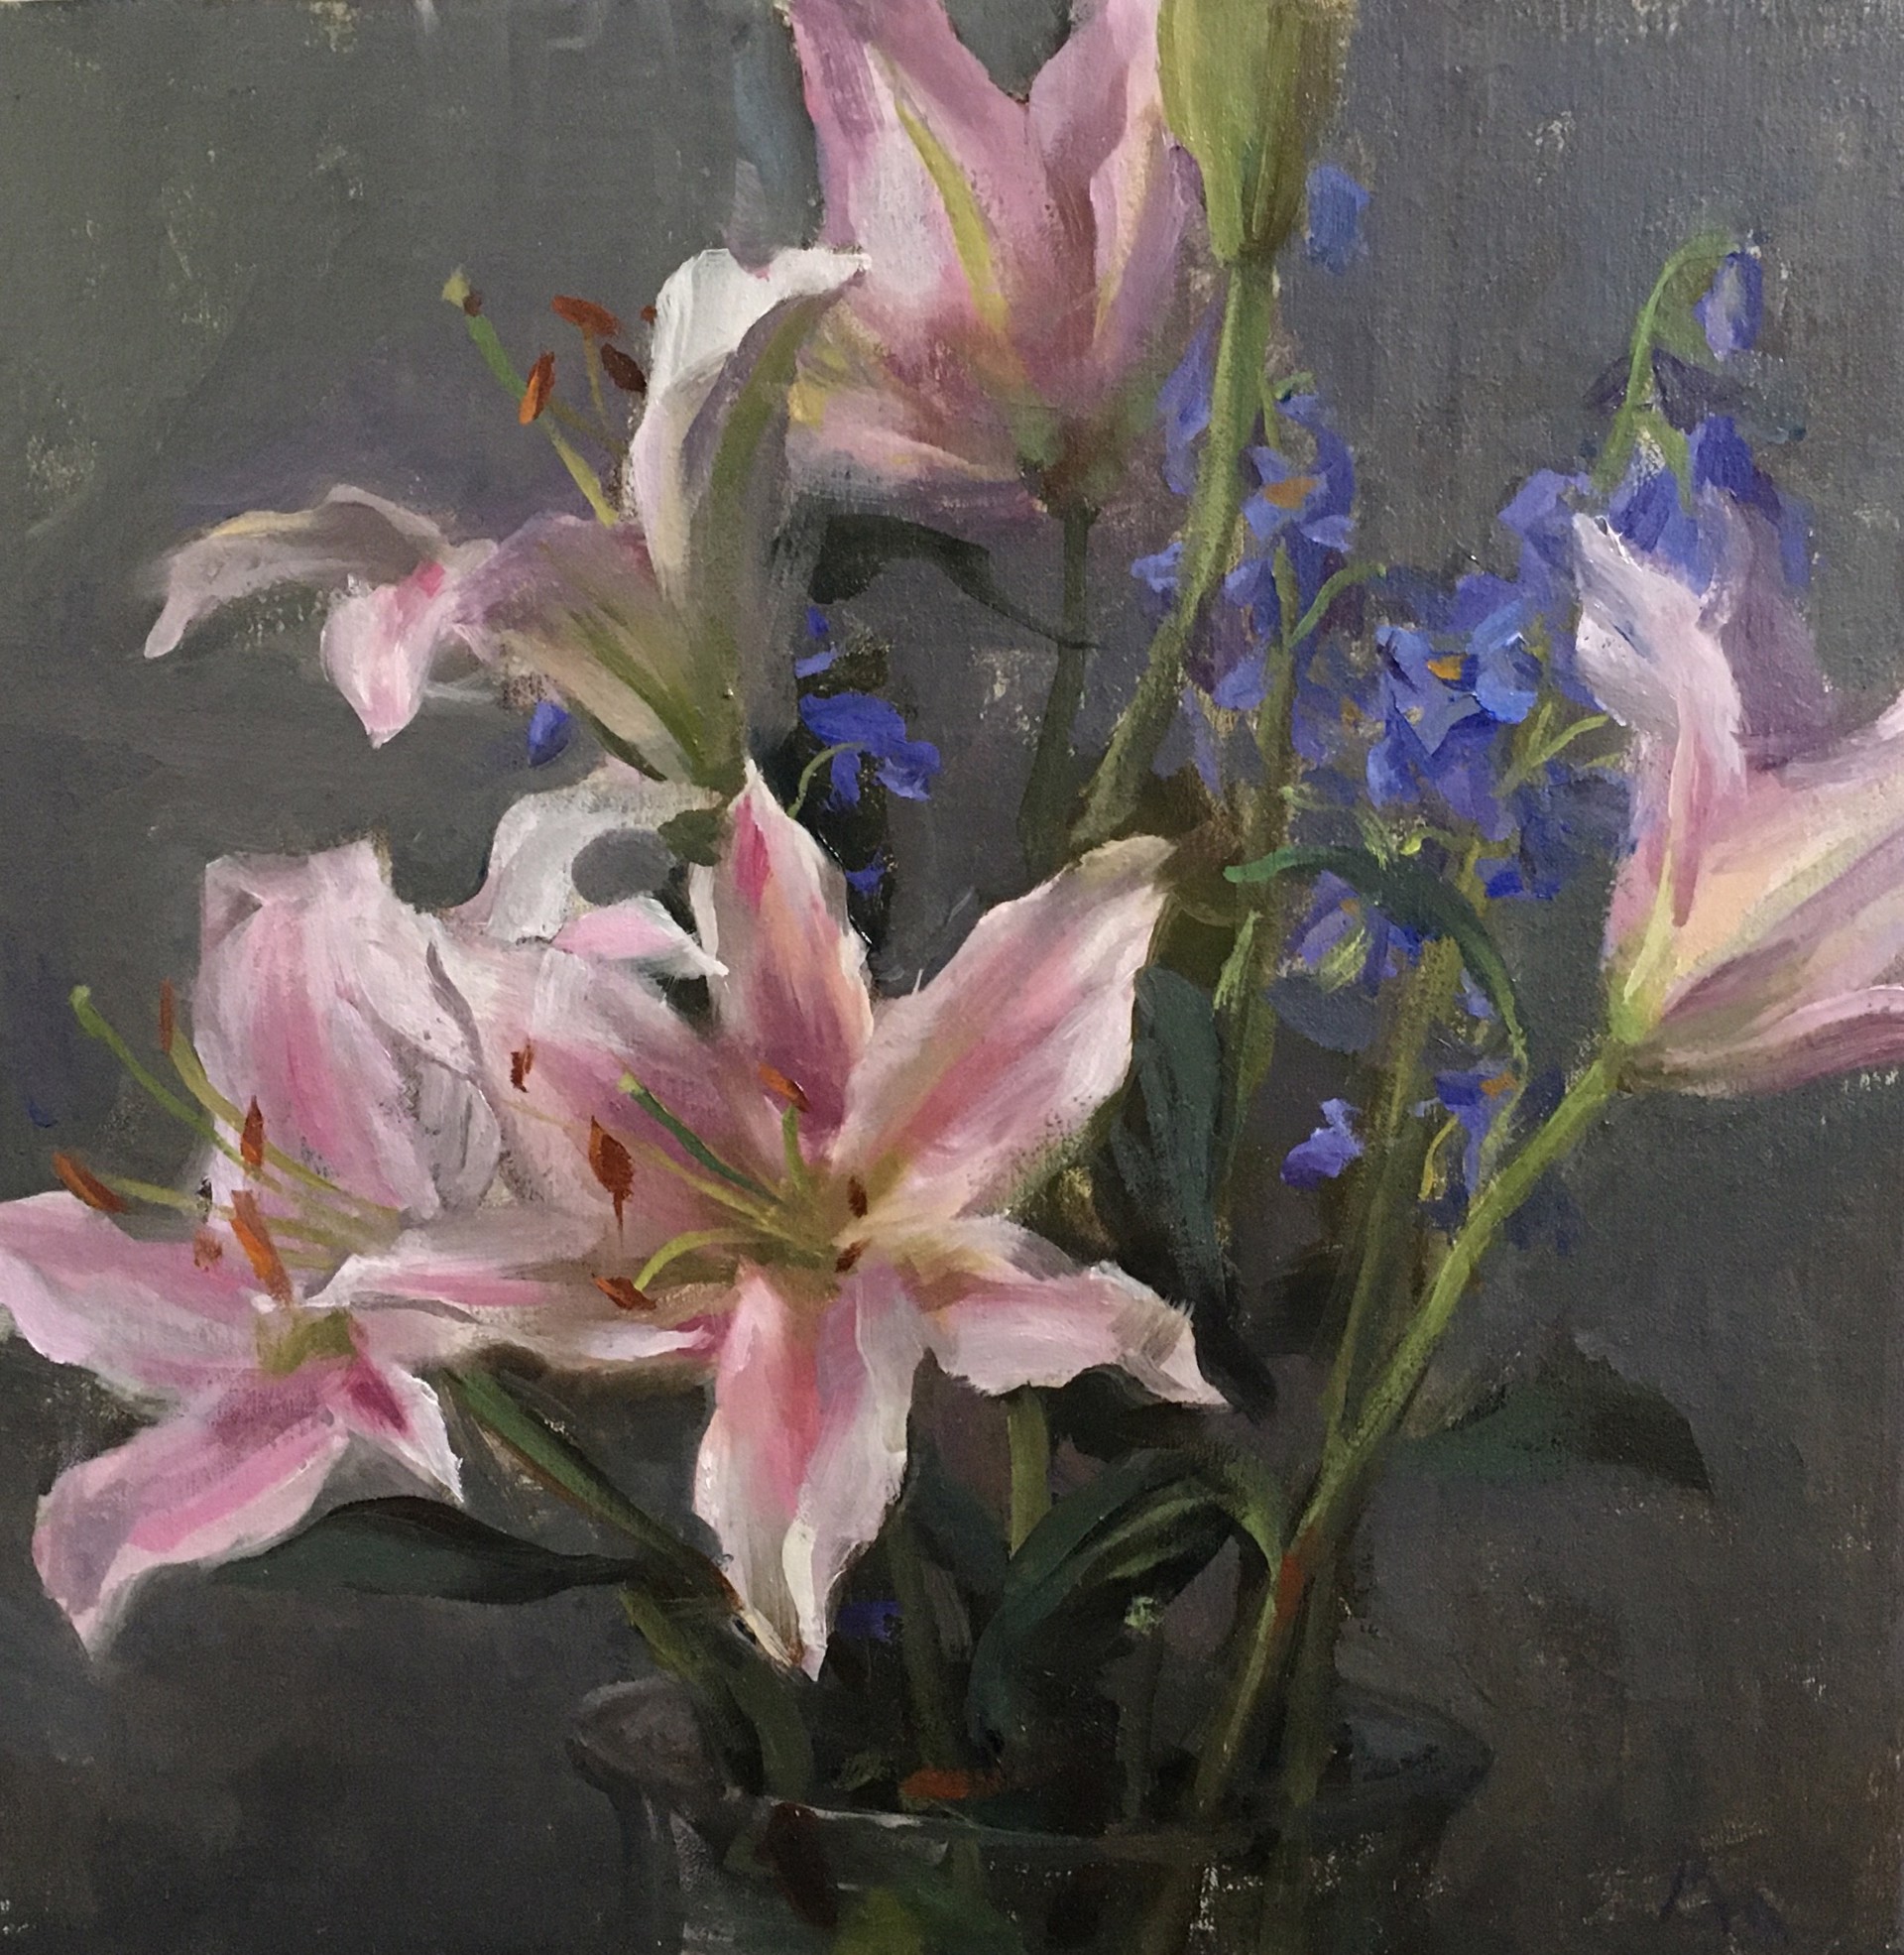 Lilies and Delphiniums by Kyle Ma